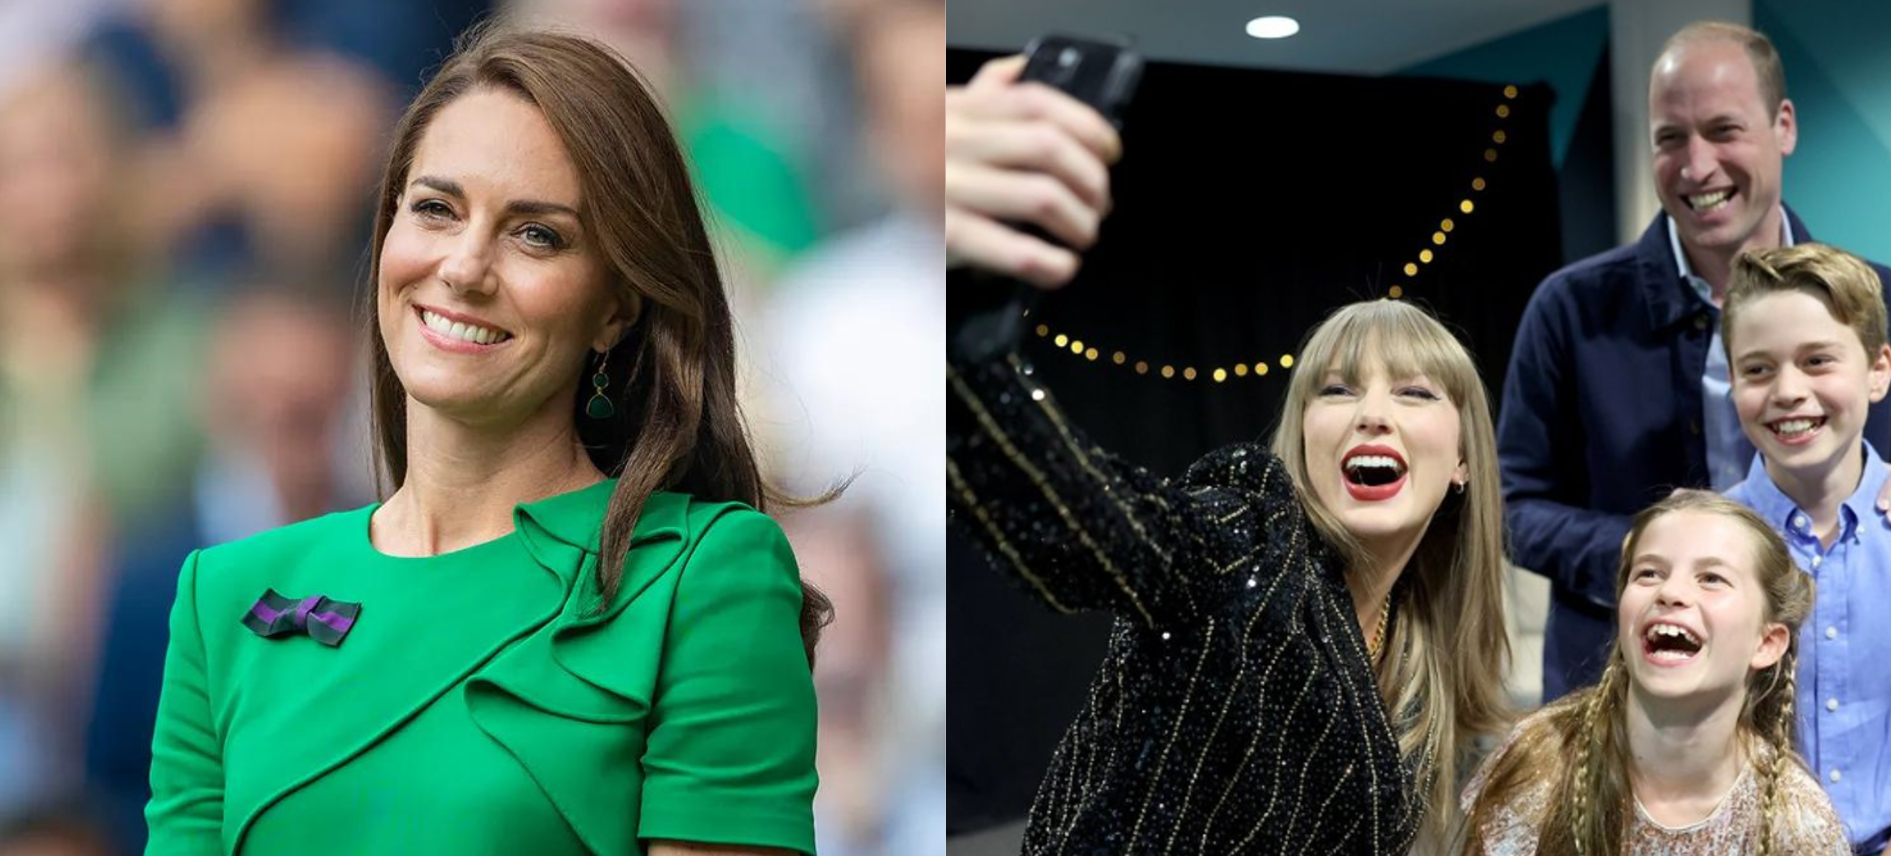 Kate Middleton receives praise for her reaction to Taylor Swift concert |  Pakistan Today